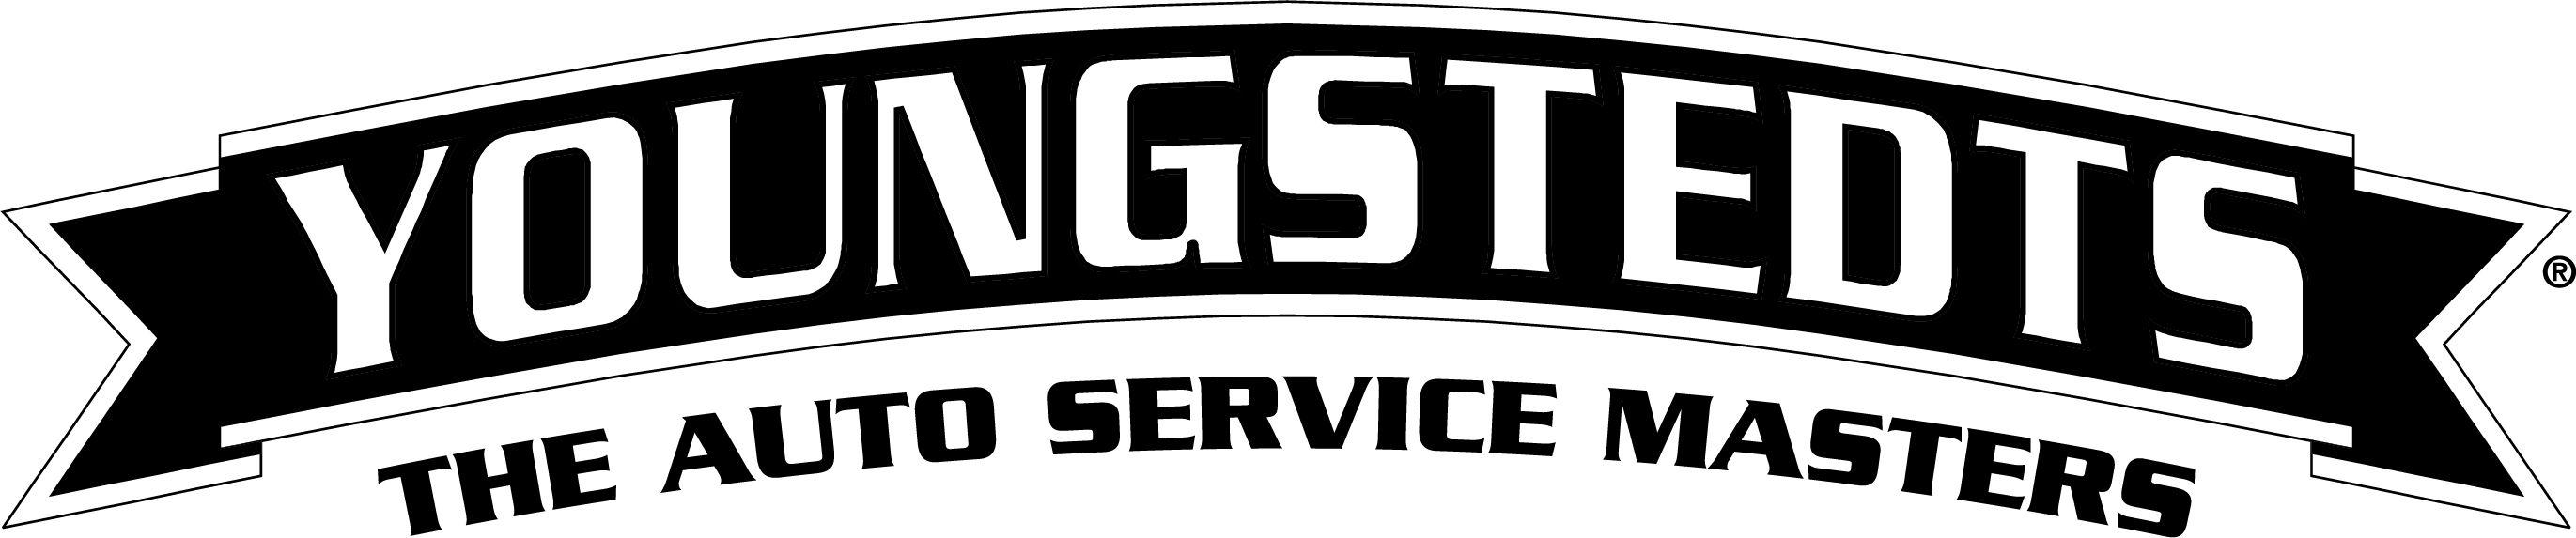 Ste Logo - Logos | Youngstedts